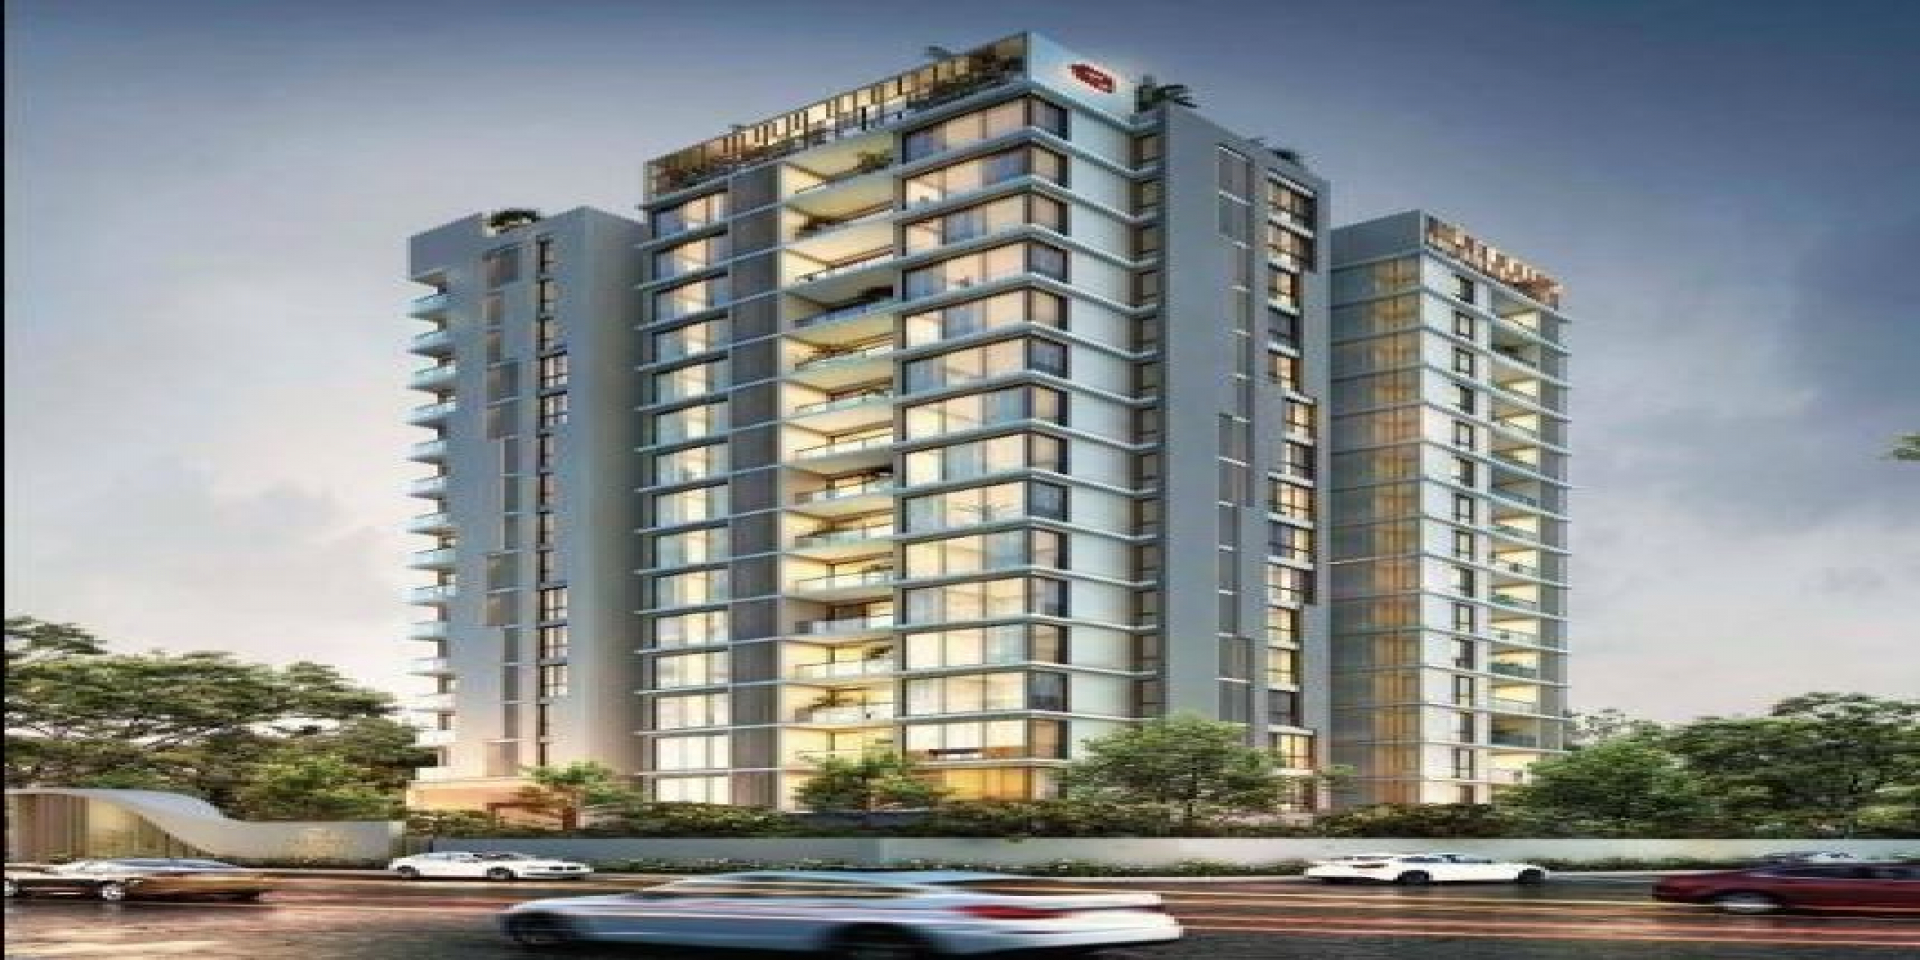 3 BHK Apartment for sale in R A Puram